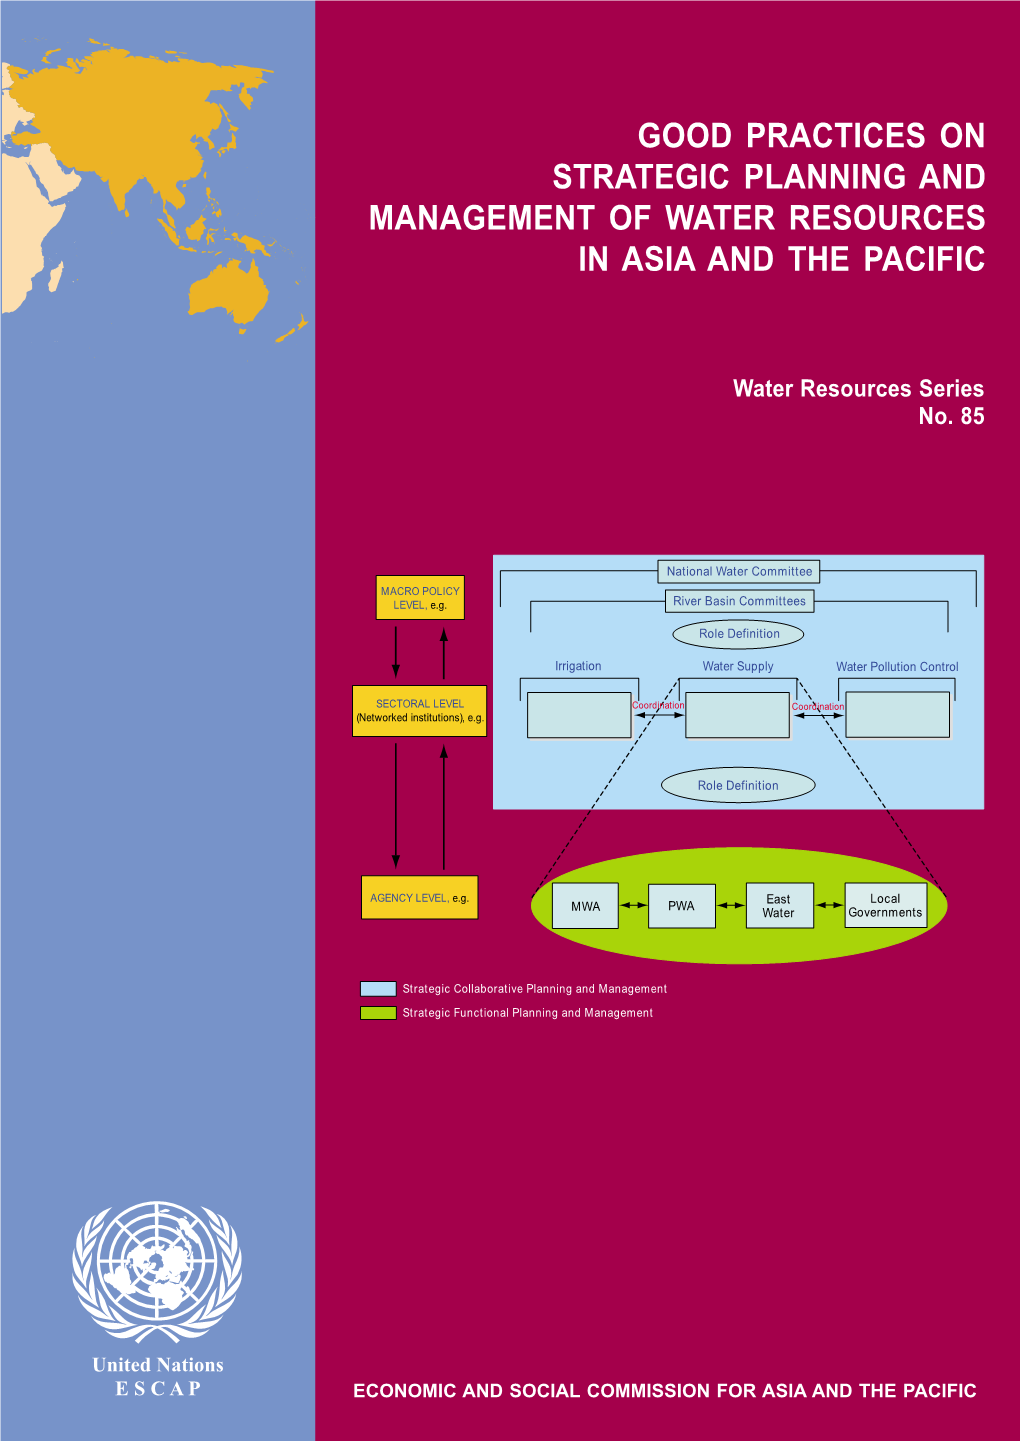 Good Practices on Strategic Planning and Management of Water Resources in Asia and the Pacific